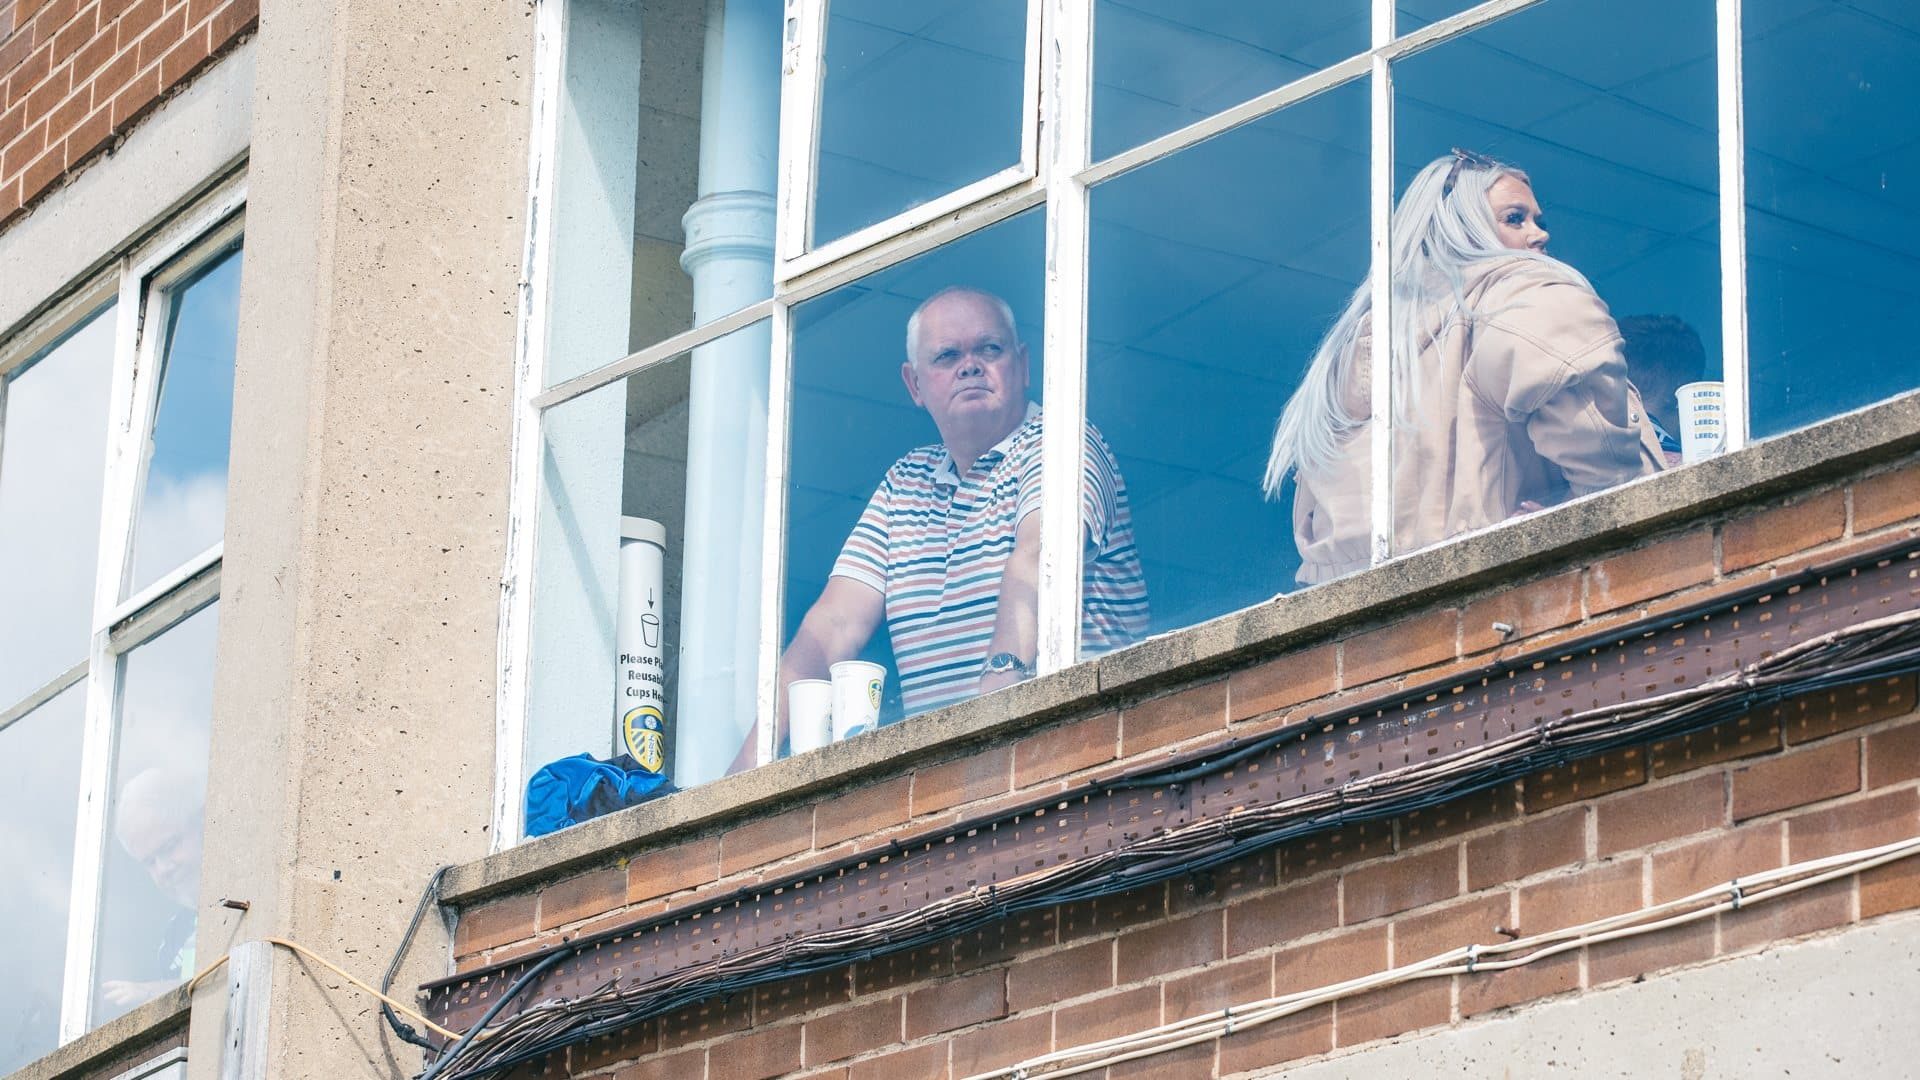 Two Leeds fans in one of the NW corner bars, viewed through the window from outside Elland Road stadium, one of them leaning on the windowledge and gazing out at Beeston